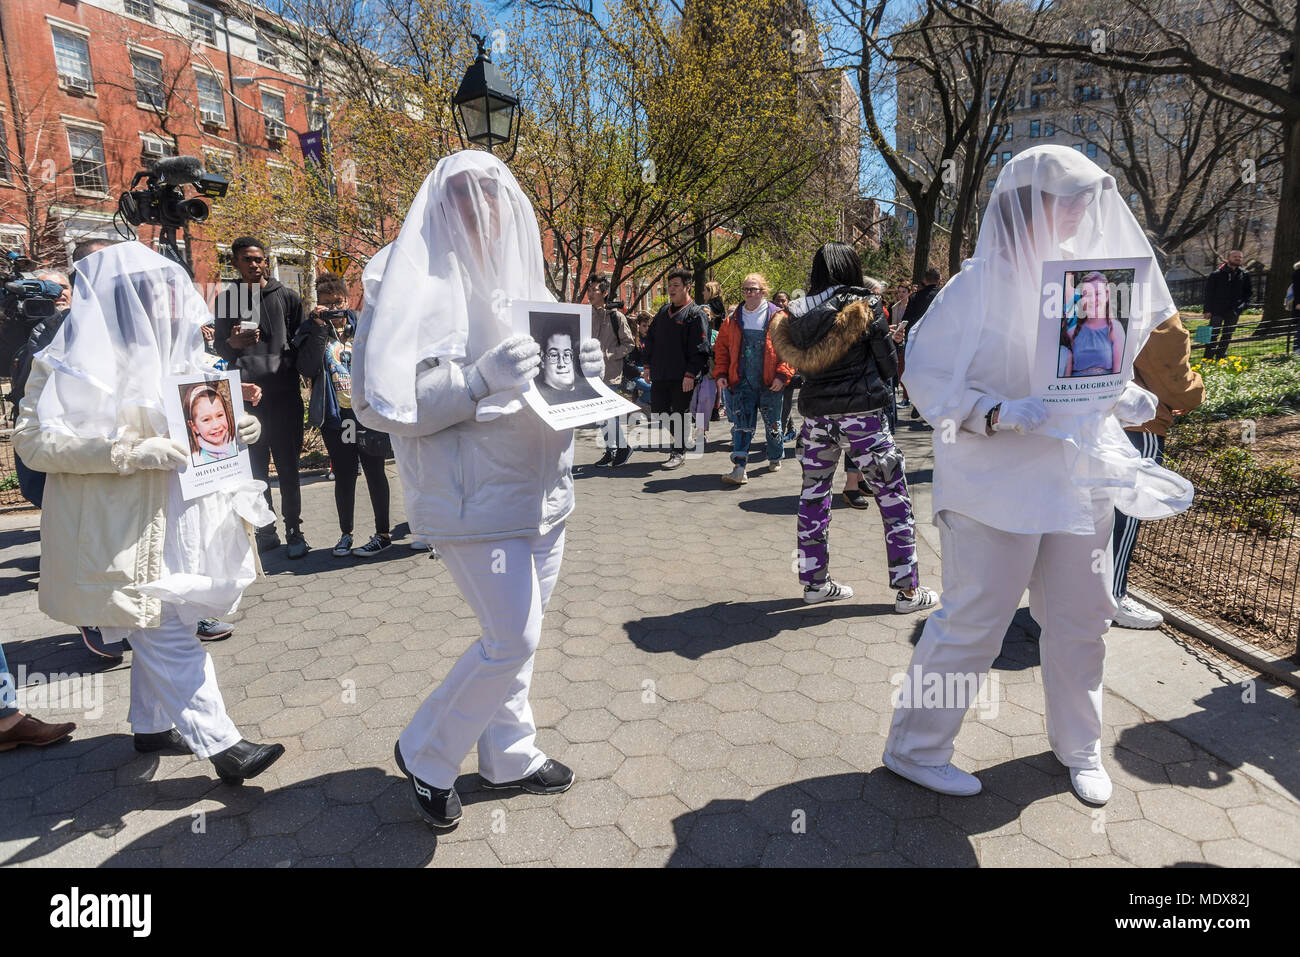 New York, NY- 20 April 2018 - NATIONAL STUDENT WALK-OUT Students walked out of class to mark the 19th anniversary of the Columbine School shooting. Several thousand rallied in Washington Square Park calling for stiffer gun control measures including a ban on assault weapons and a universal background check. CREDIT: ©Stacy Walsh Rosenstock/Alamy Live News Stock Photo